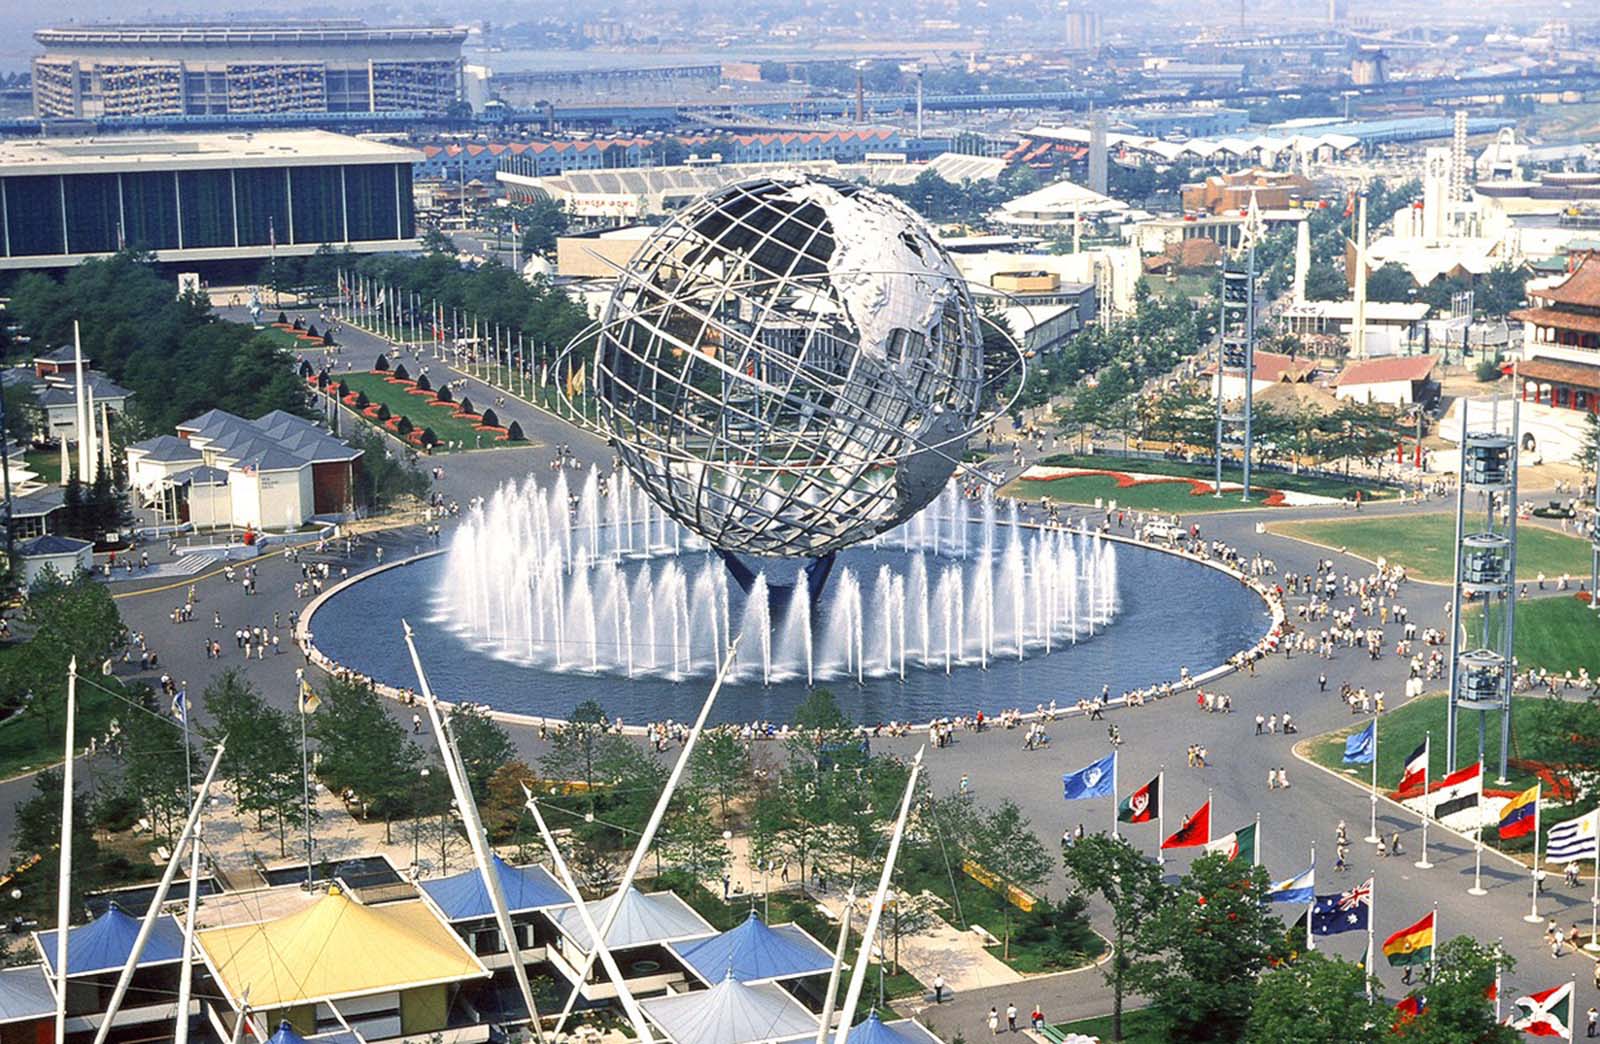 The Unisphere, the 12-story stainless-steel globe at the heart of the 1964 World's Fair, and its symbol around the world.